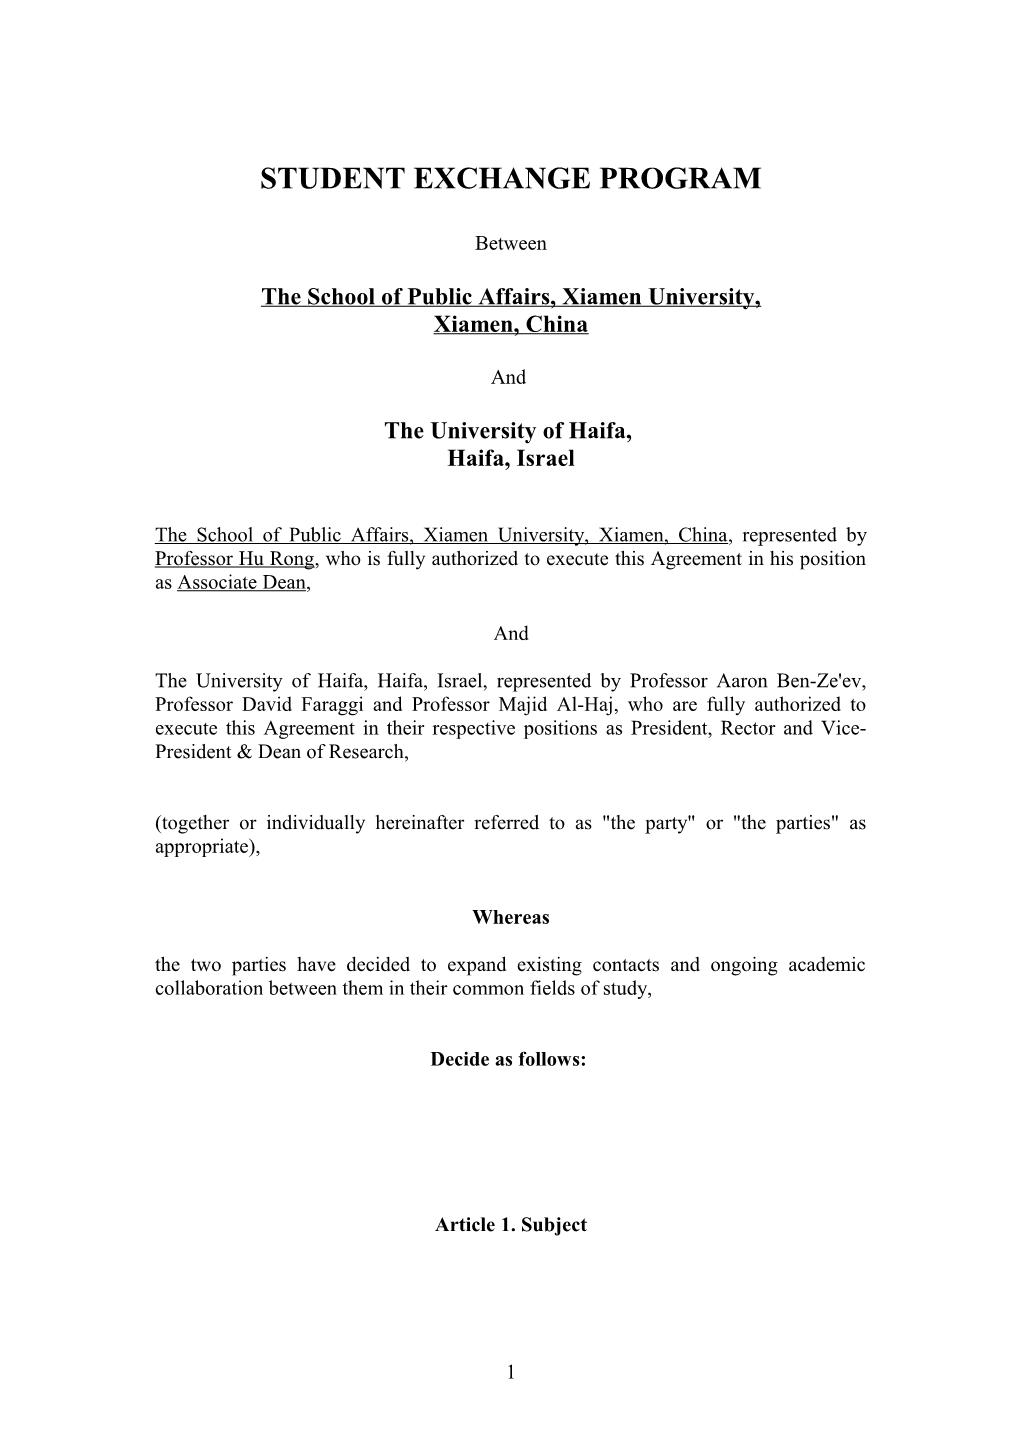 Agreement of Academic Cooperation